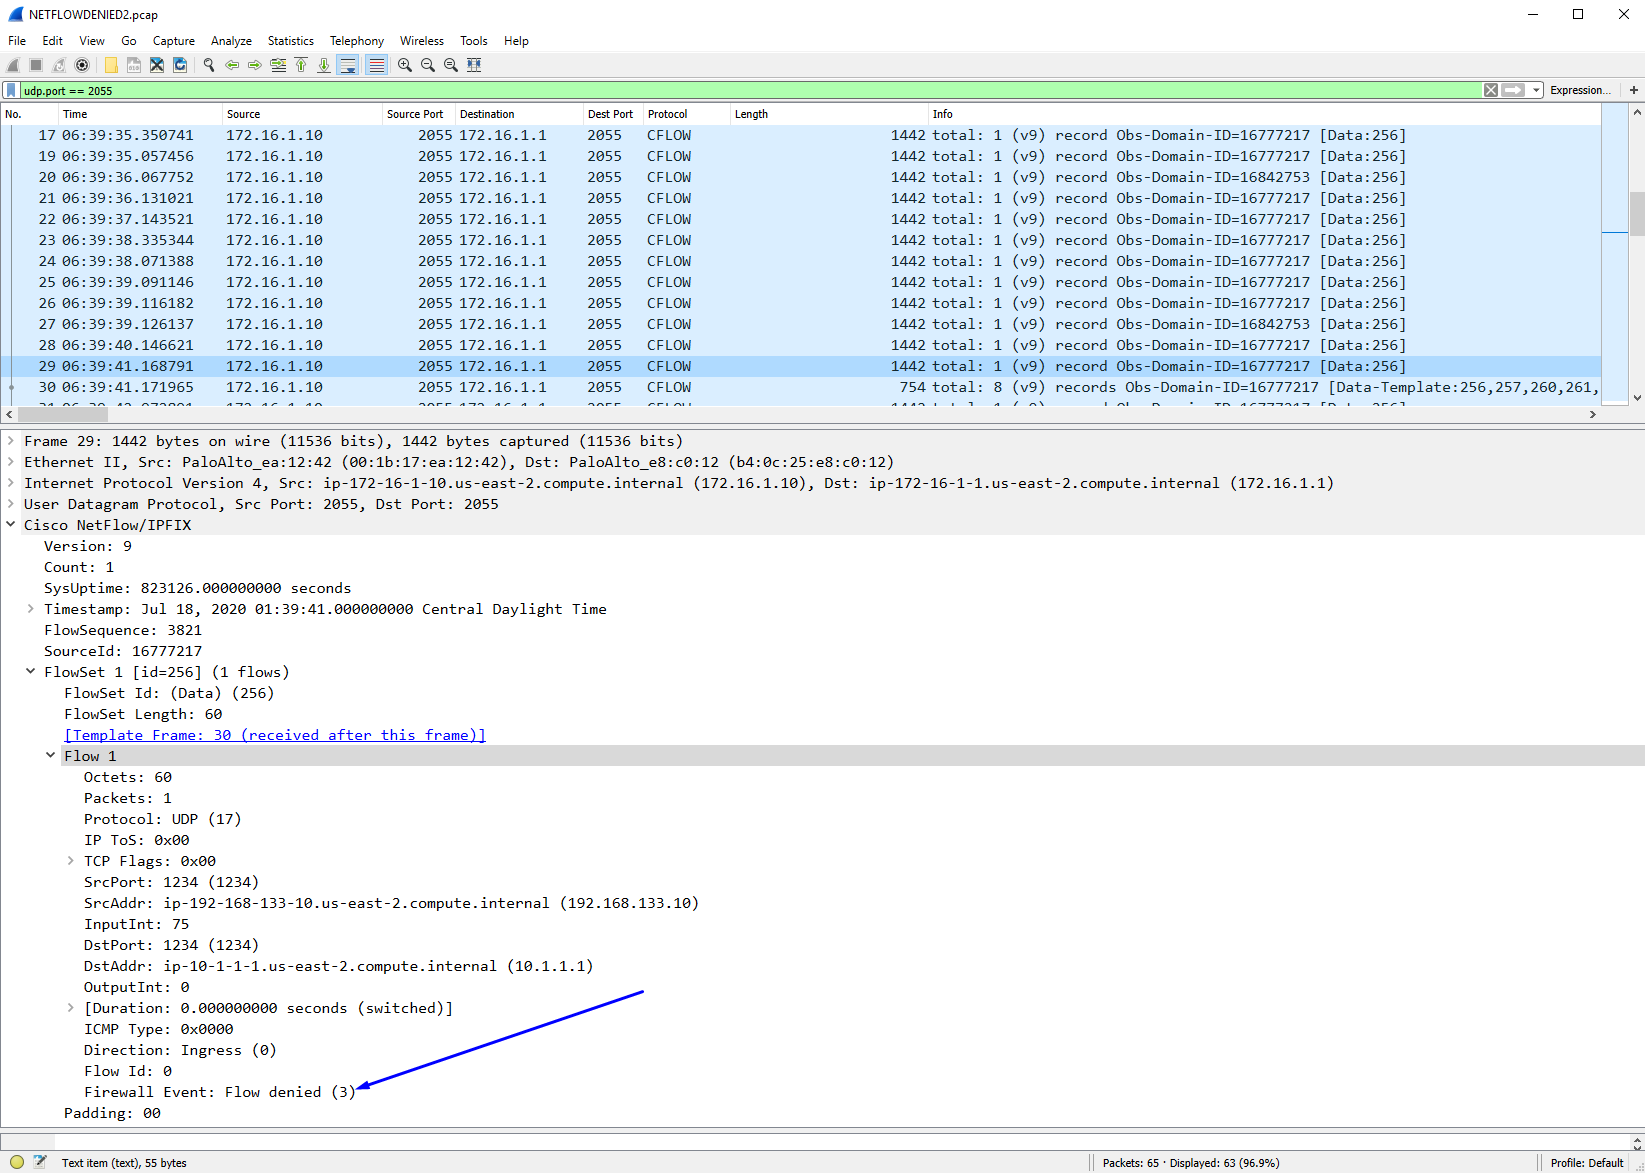 Example in Wireshark of a Netflow packet from the firewall of a Flow Denied